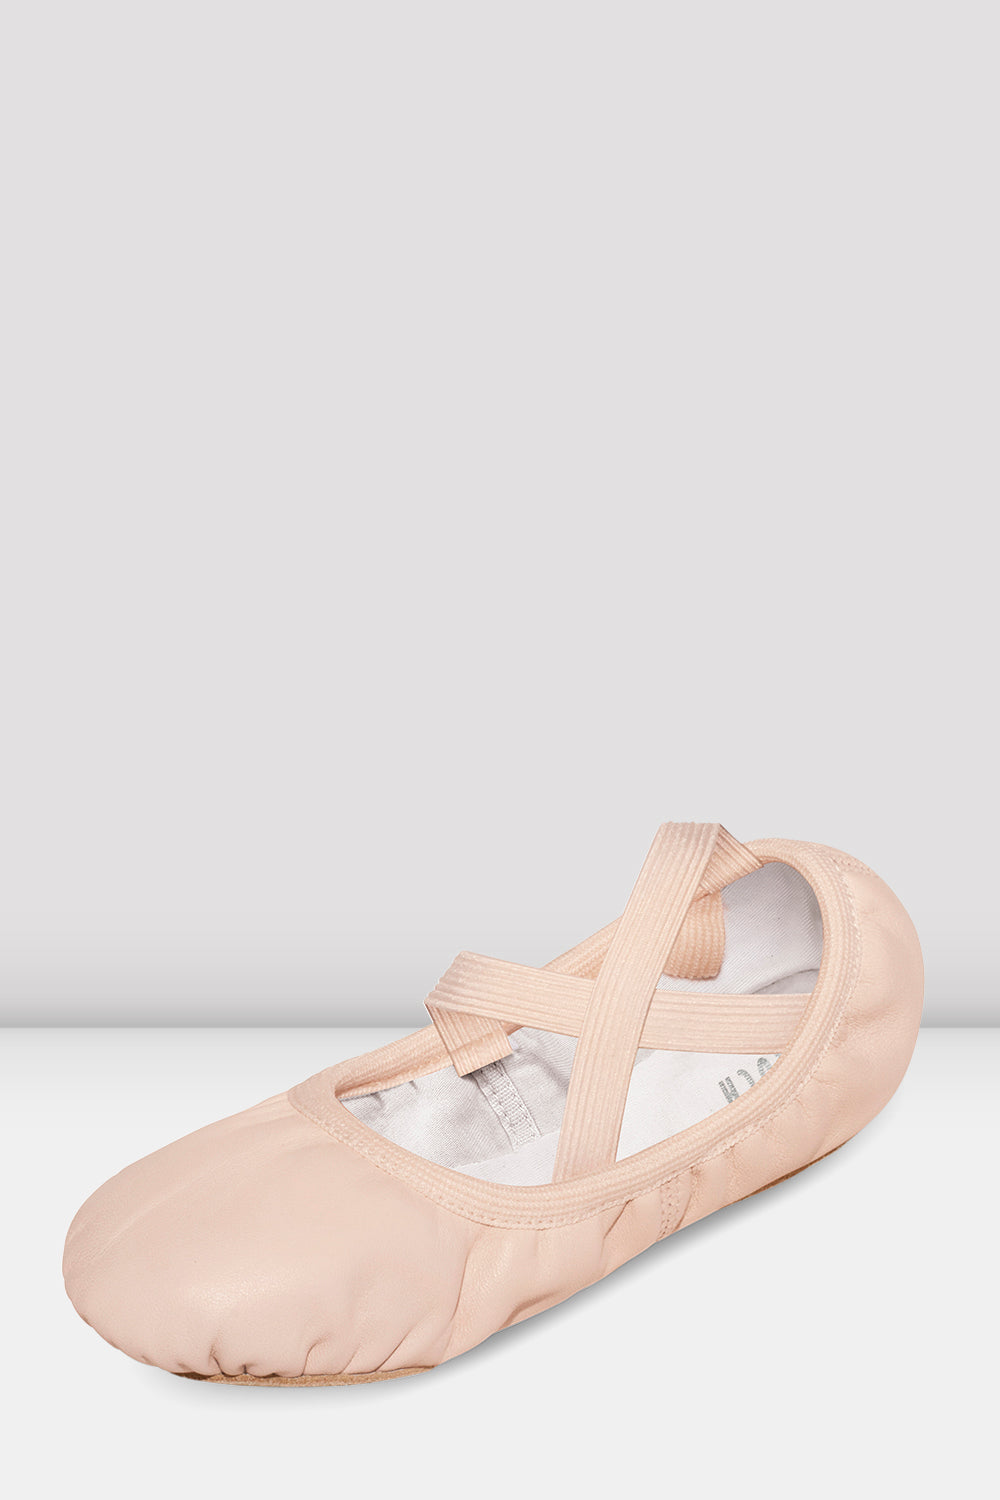 Childrens Odette Leather Ballet Shoes, Theatrical Pink – BLOCH Dance US